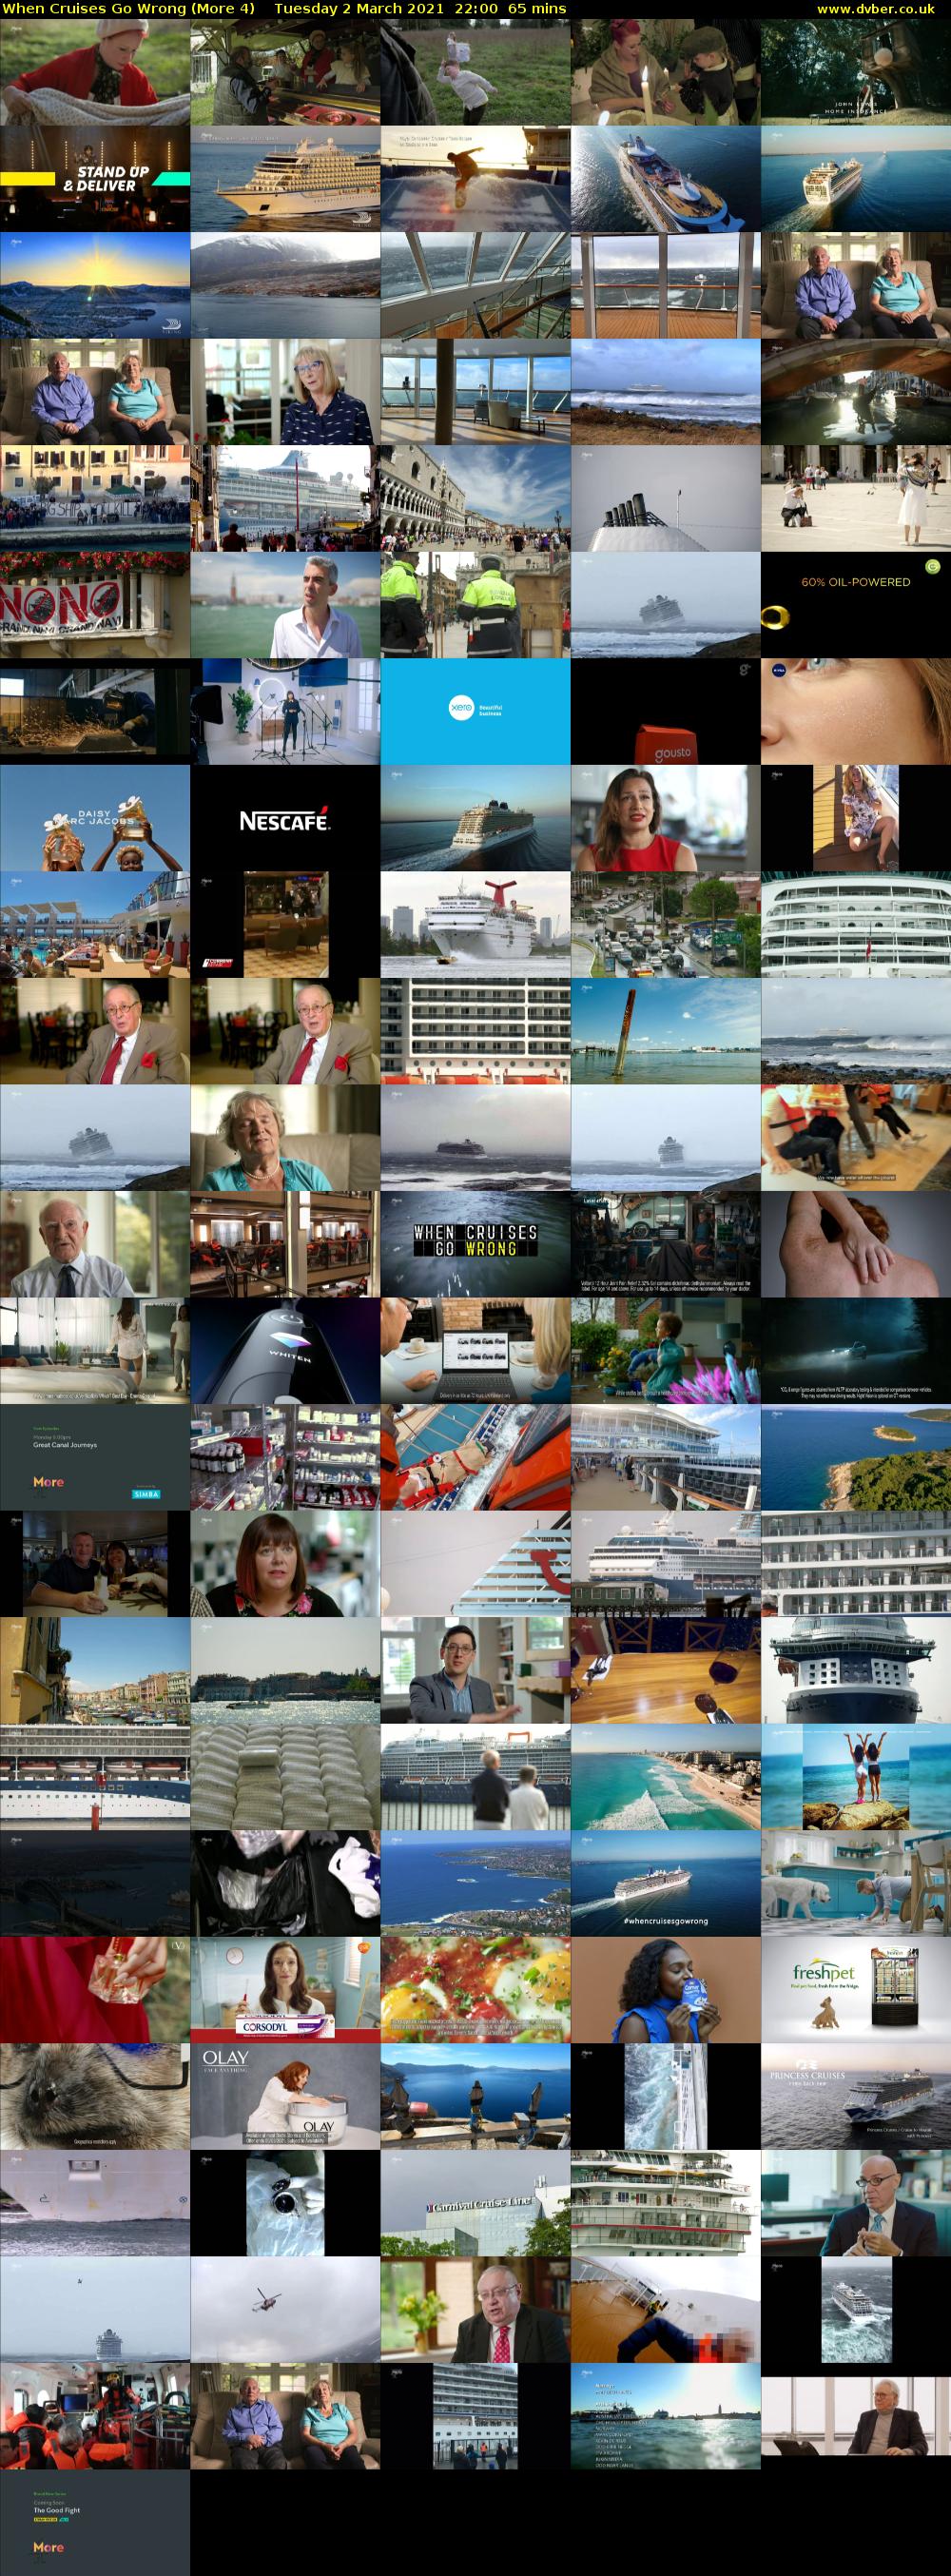 When Cruises Go Wrong (More 4) Tuesday 2 March 2021 22:00 - 23:05